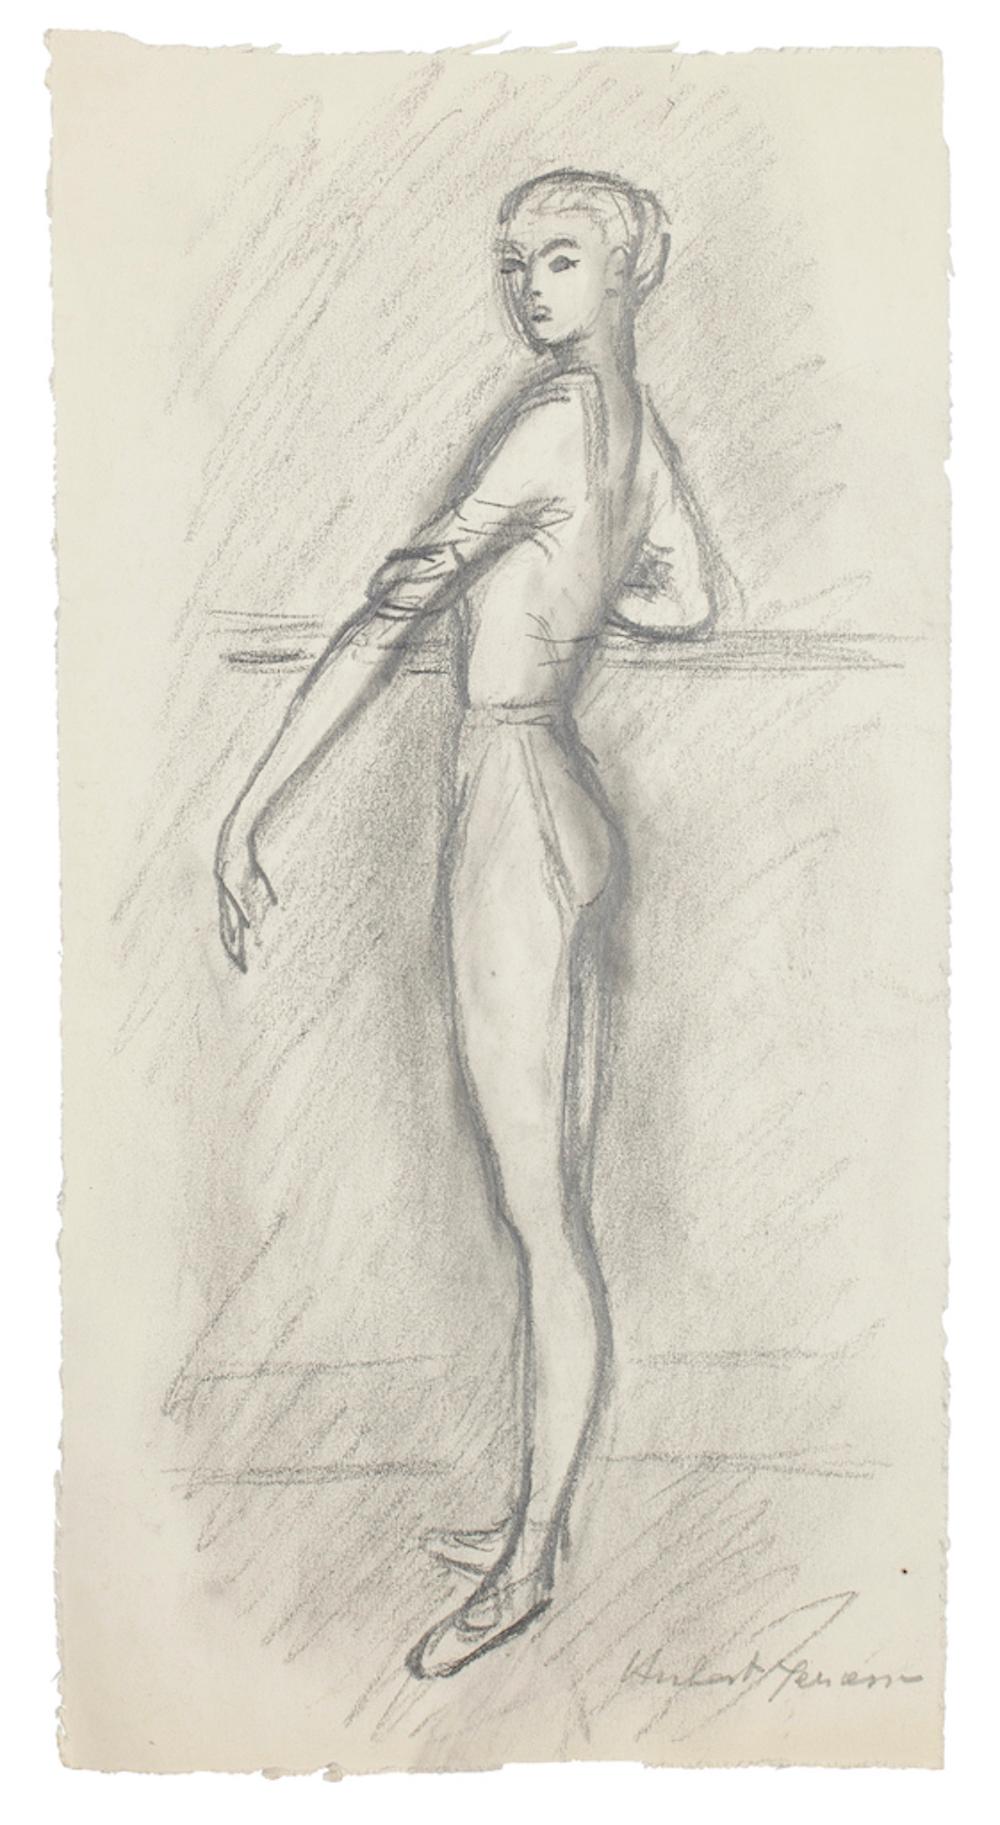 Ballet Dancers is a series of 15 original drawings in pen and pencil on paper, realized Hubert Yencesse in 1951, all of them are Hand-signed.

The state of preservation of the artwork is good.

The artwork represents the study of Ballet dancers